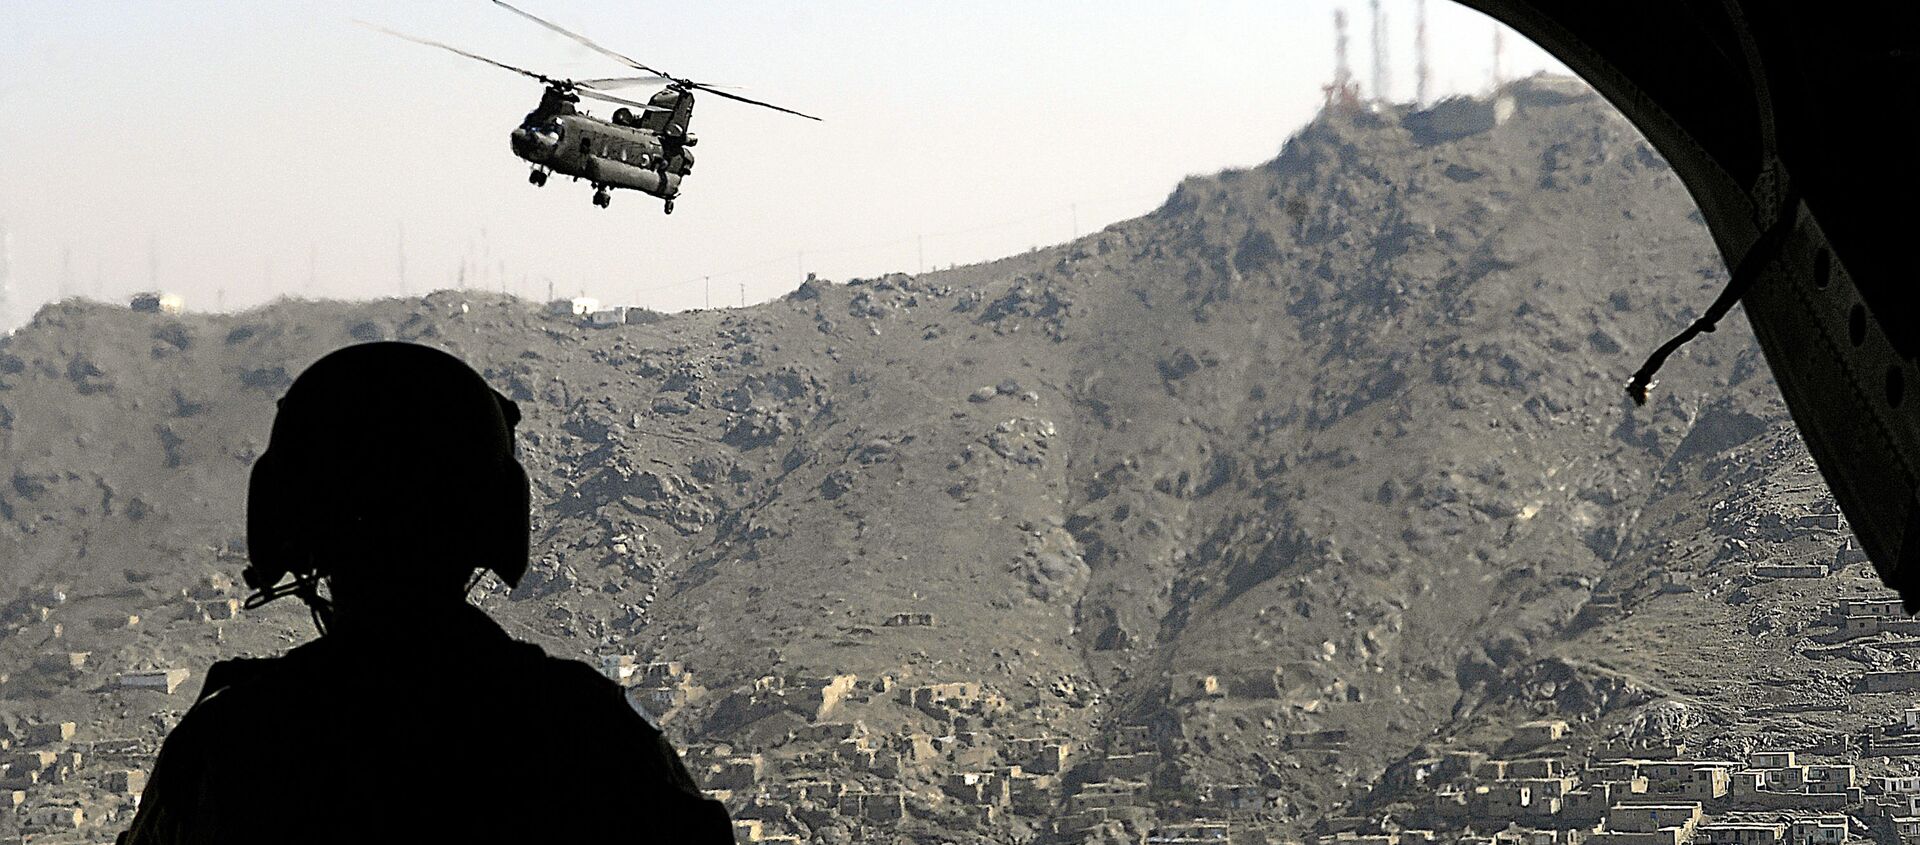 A CH-47 Chinook helicopter flies over Kabul, Afghanistan, June 4, 2007.  DoD photo by Cherie A. Thurlby.  - Sputnik International, 1920, 10.06.2021